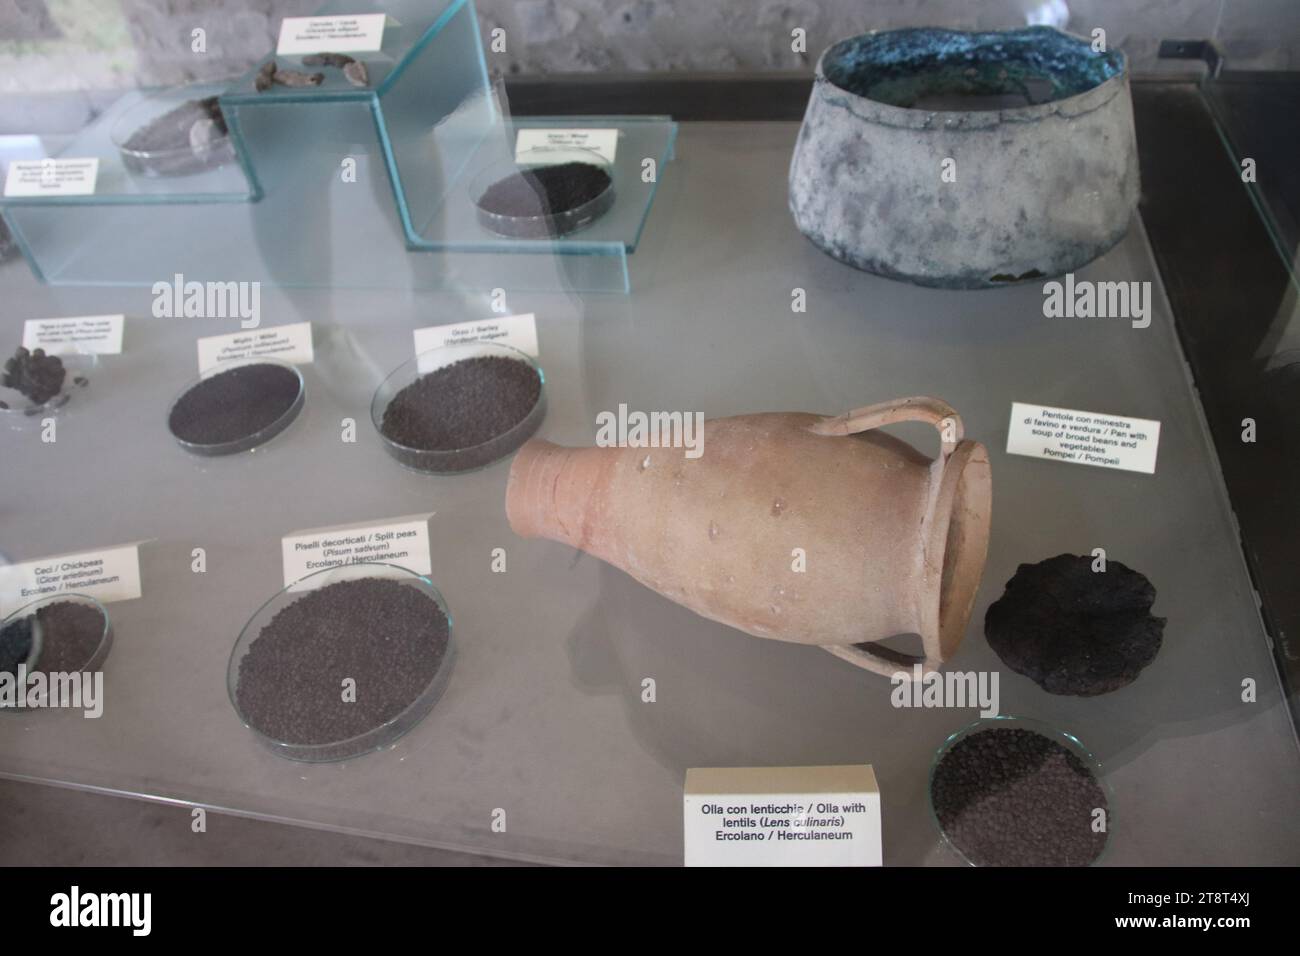 Pompeii Ruins: Exhibit of Preserved Food Items, Remains of Roman city buried by eruption of Mt. Vesuvius in 79 AD and excavated in modern times, Italy Stock Photo